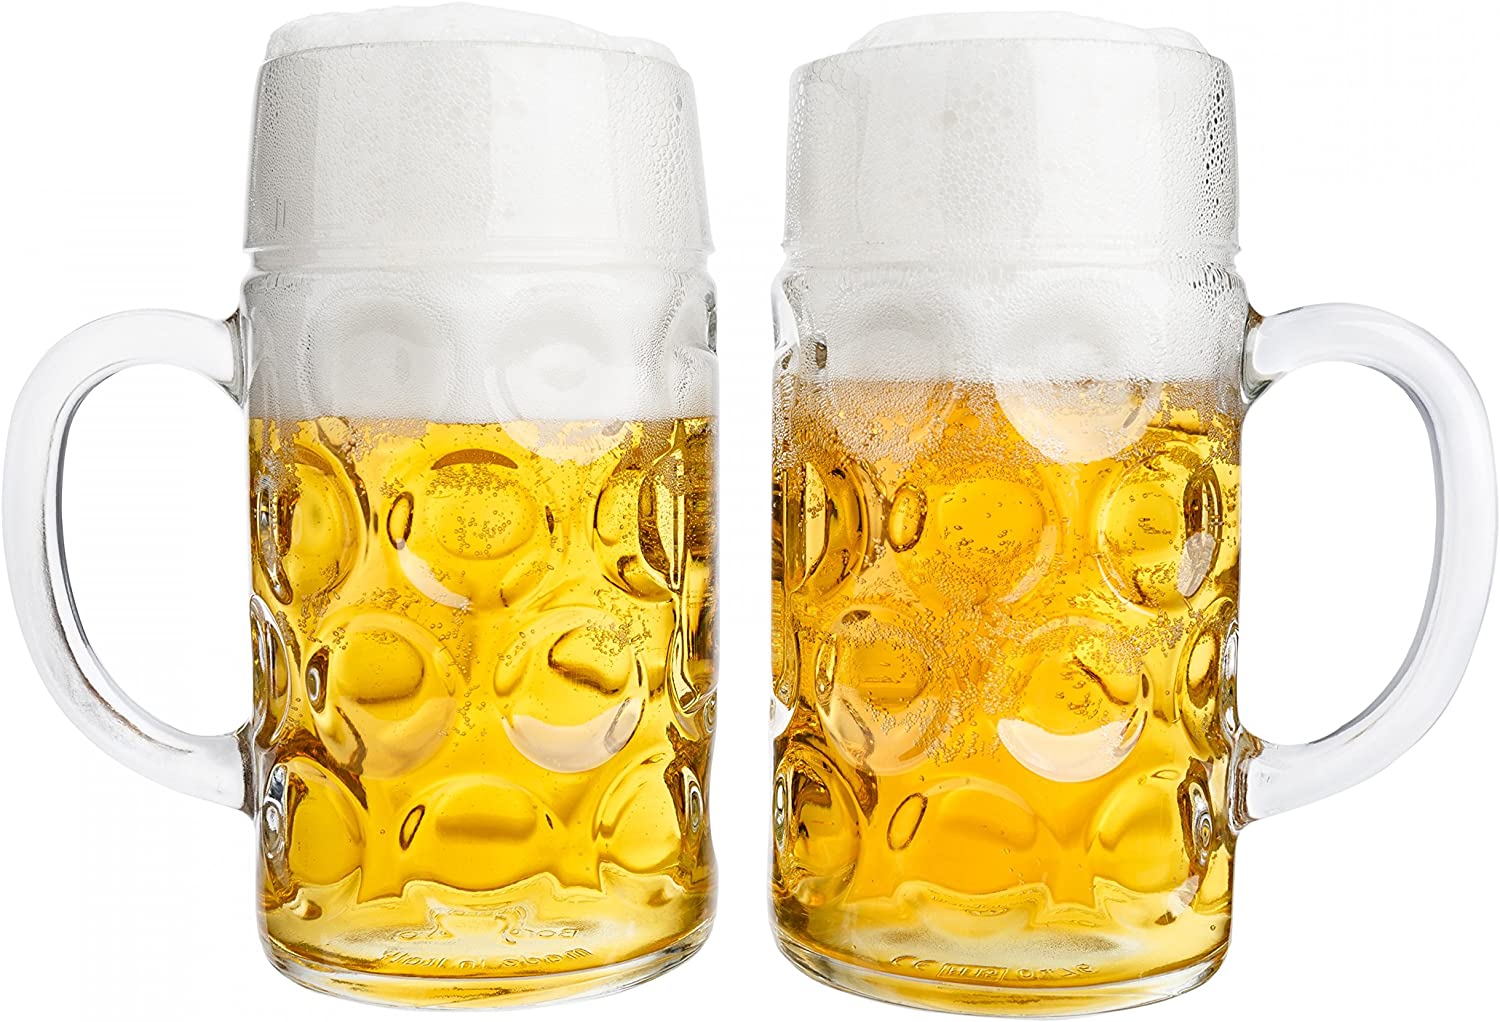 Van Well Set of 2 Beer Mugs 1 Litre Calibrated | Large Beer Mug with Handle | Beer Glass Dishwasher Safe Perfect for Catering